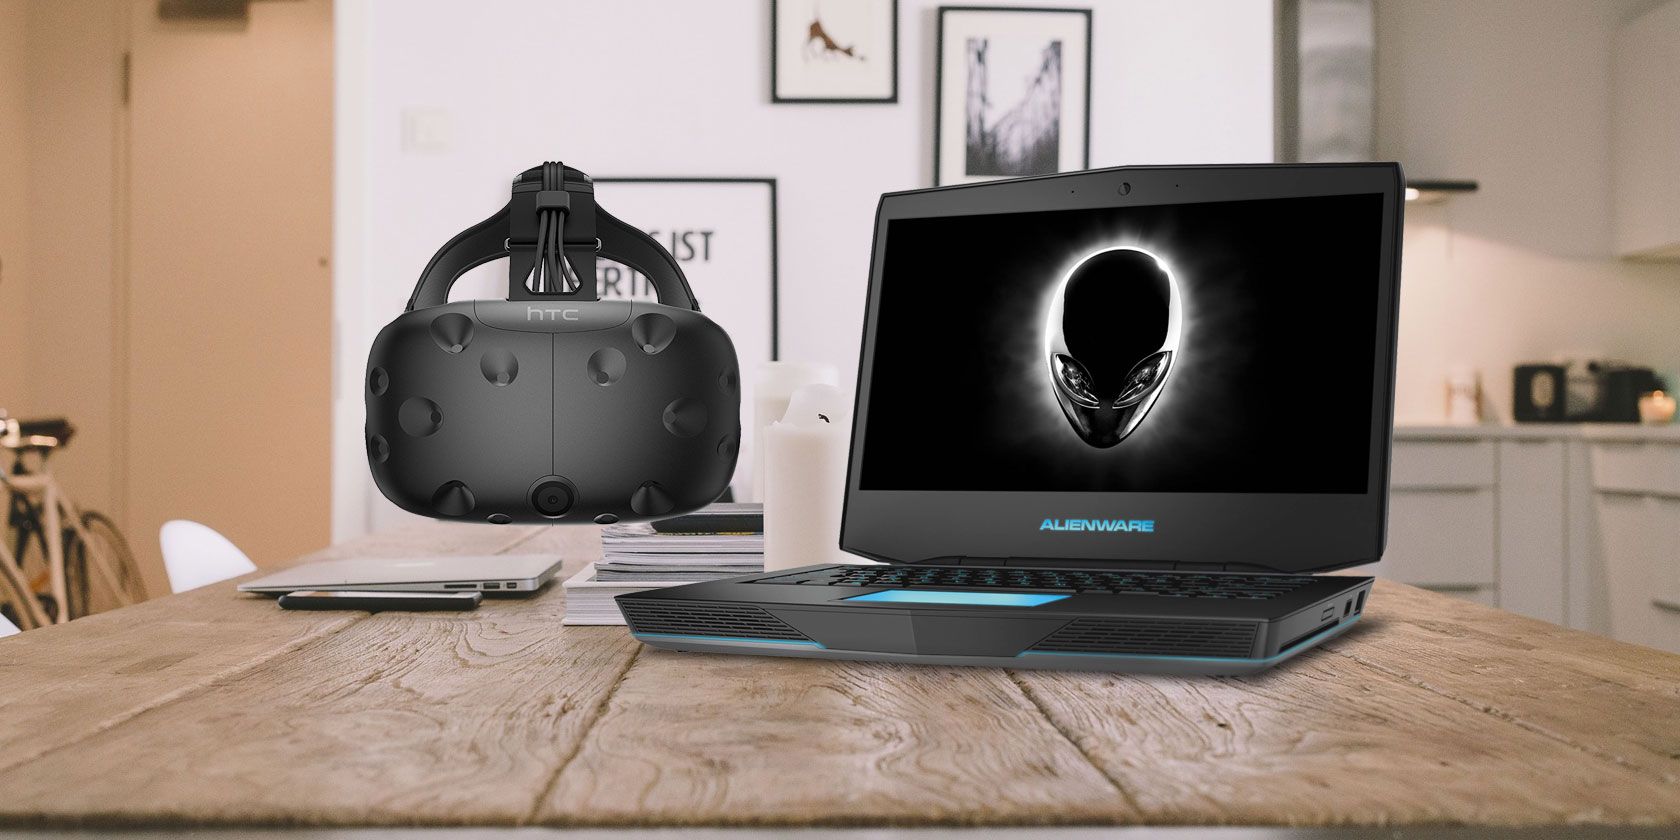 The 3 Best VR Ready Gaming Laptops for Oculus Rift and HTC Vive